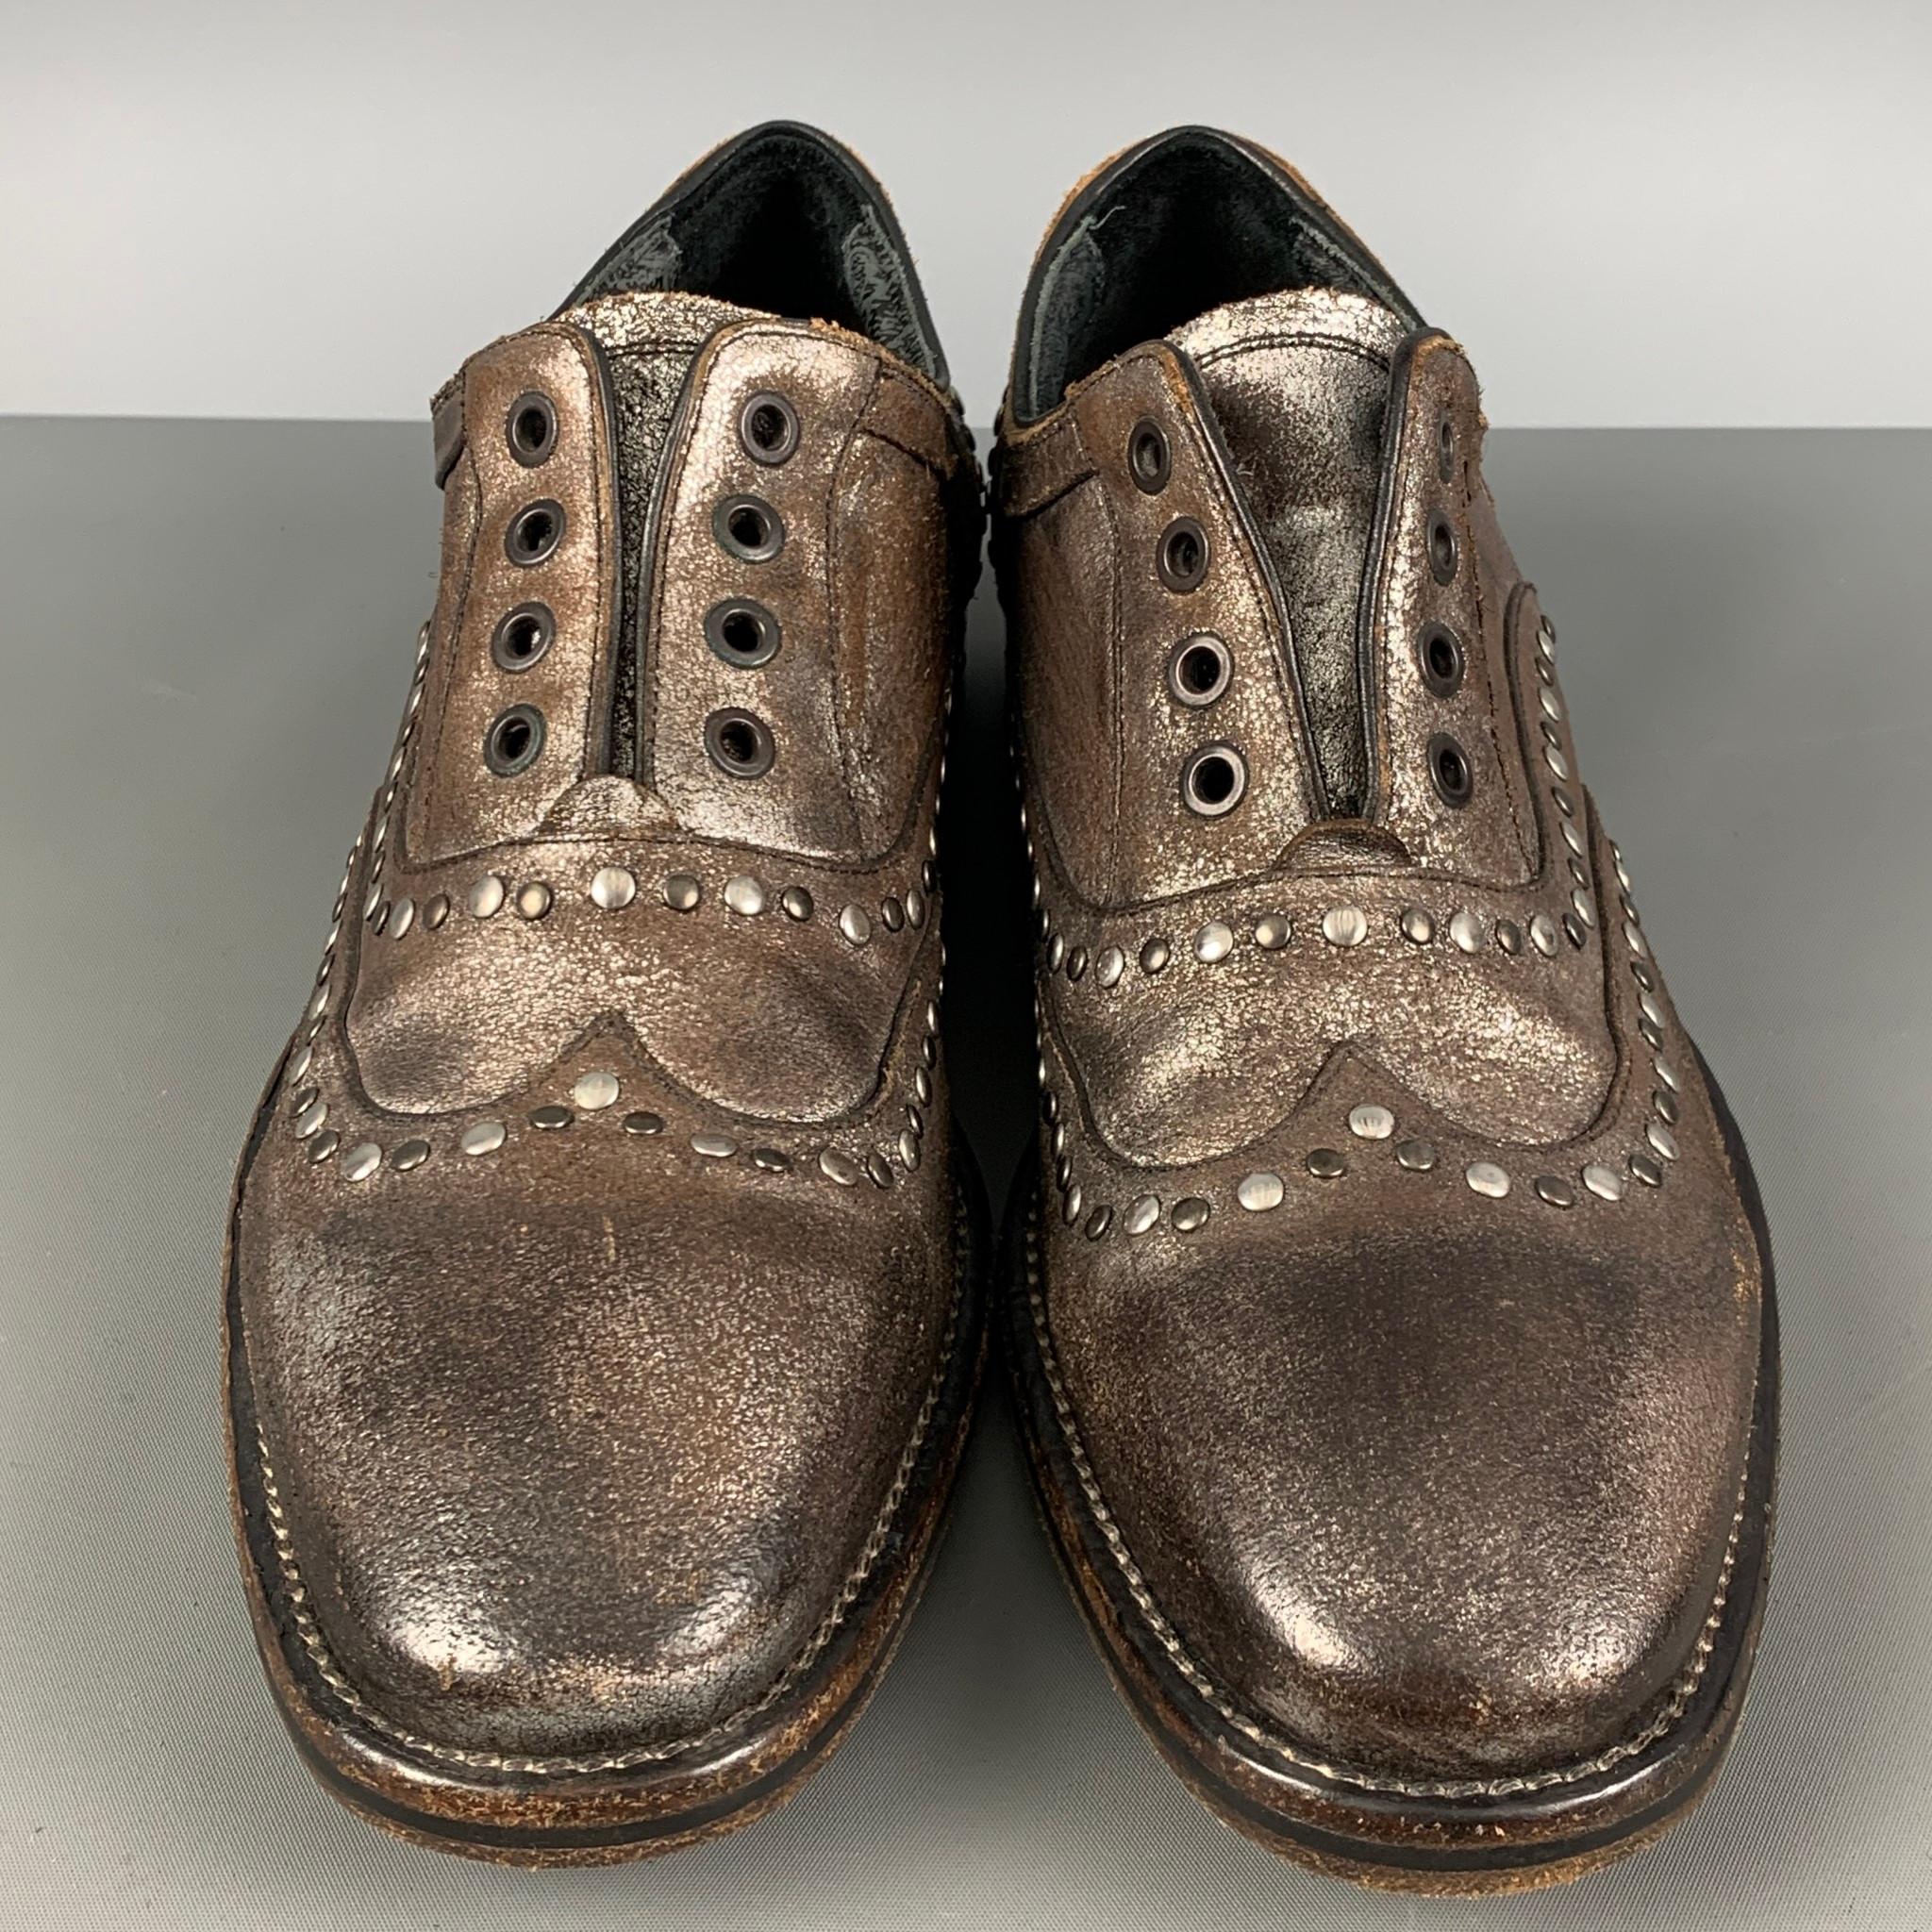 Men's JOHN VARVATOS Size 9 Brown Distressed Leather Loafer Lace Up Shoes